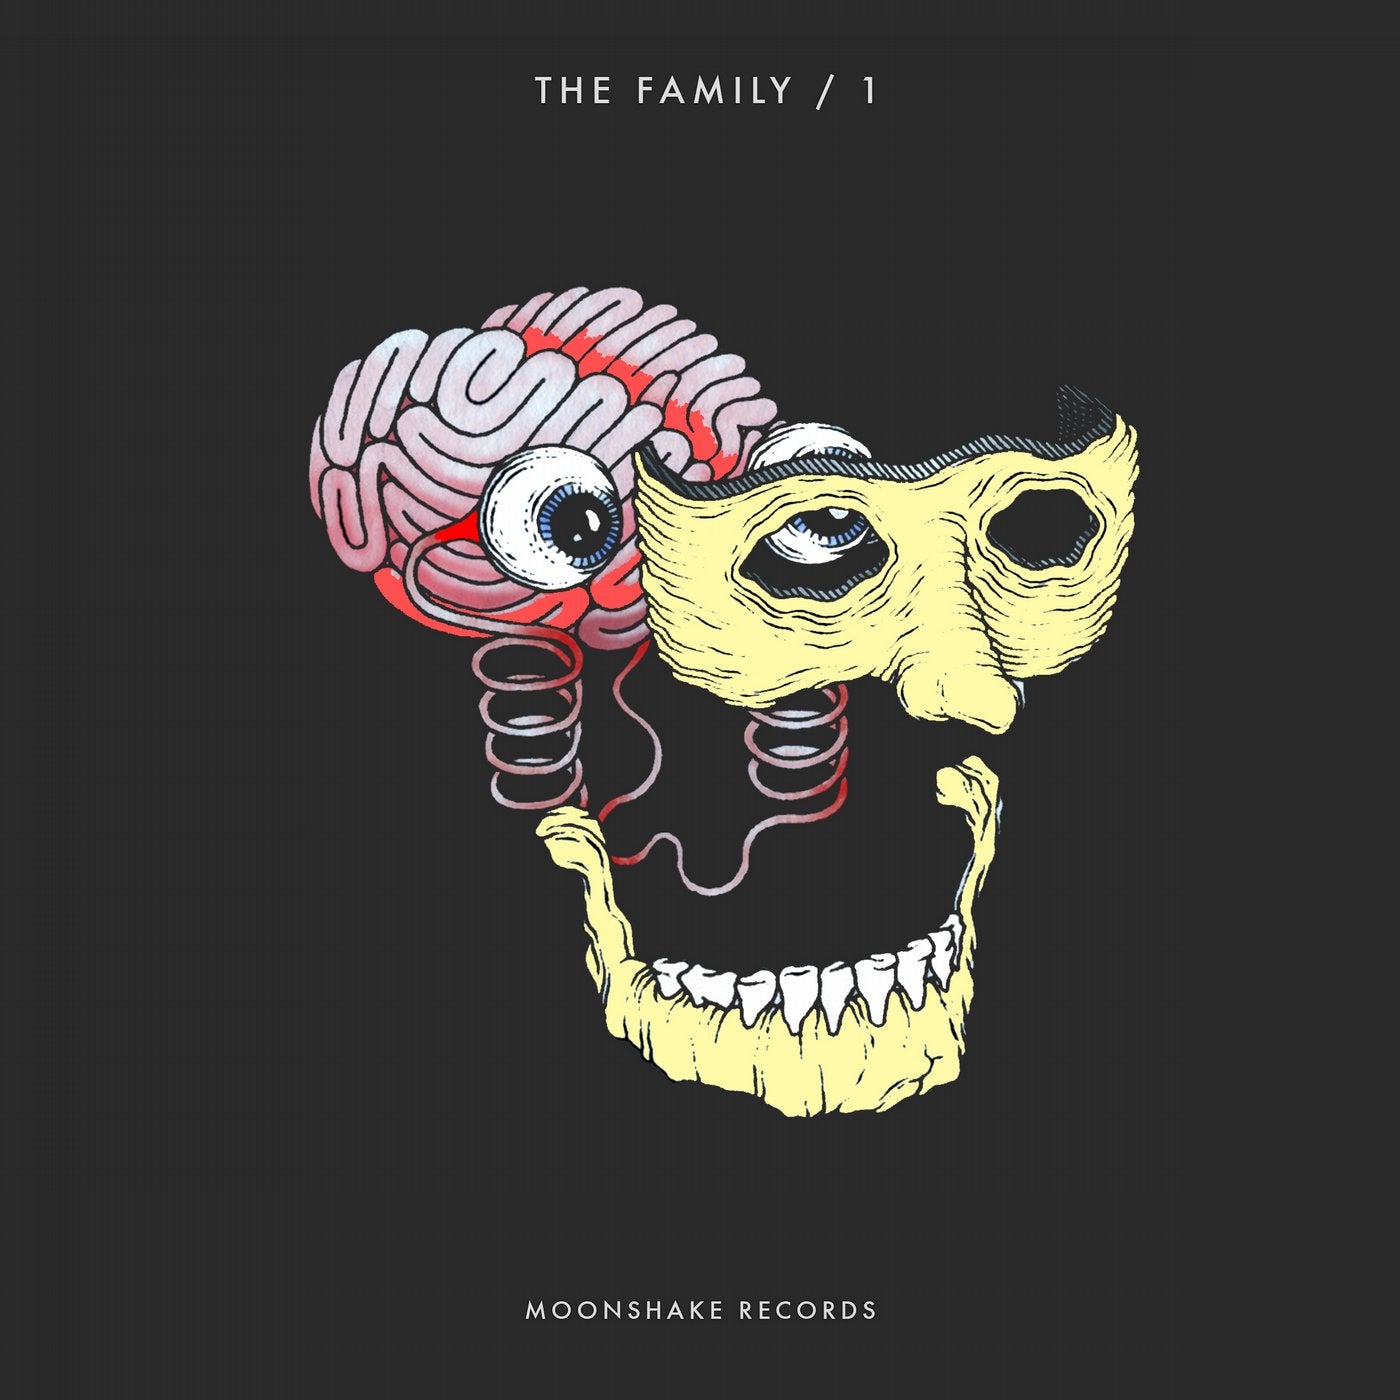 The Family / 1